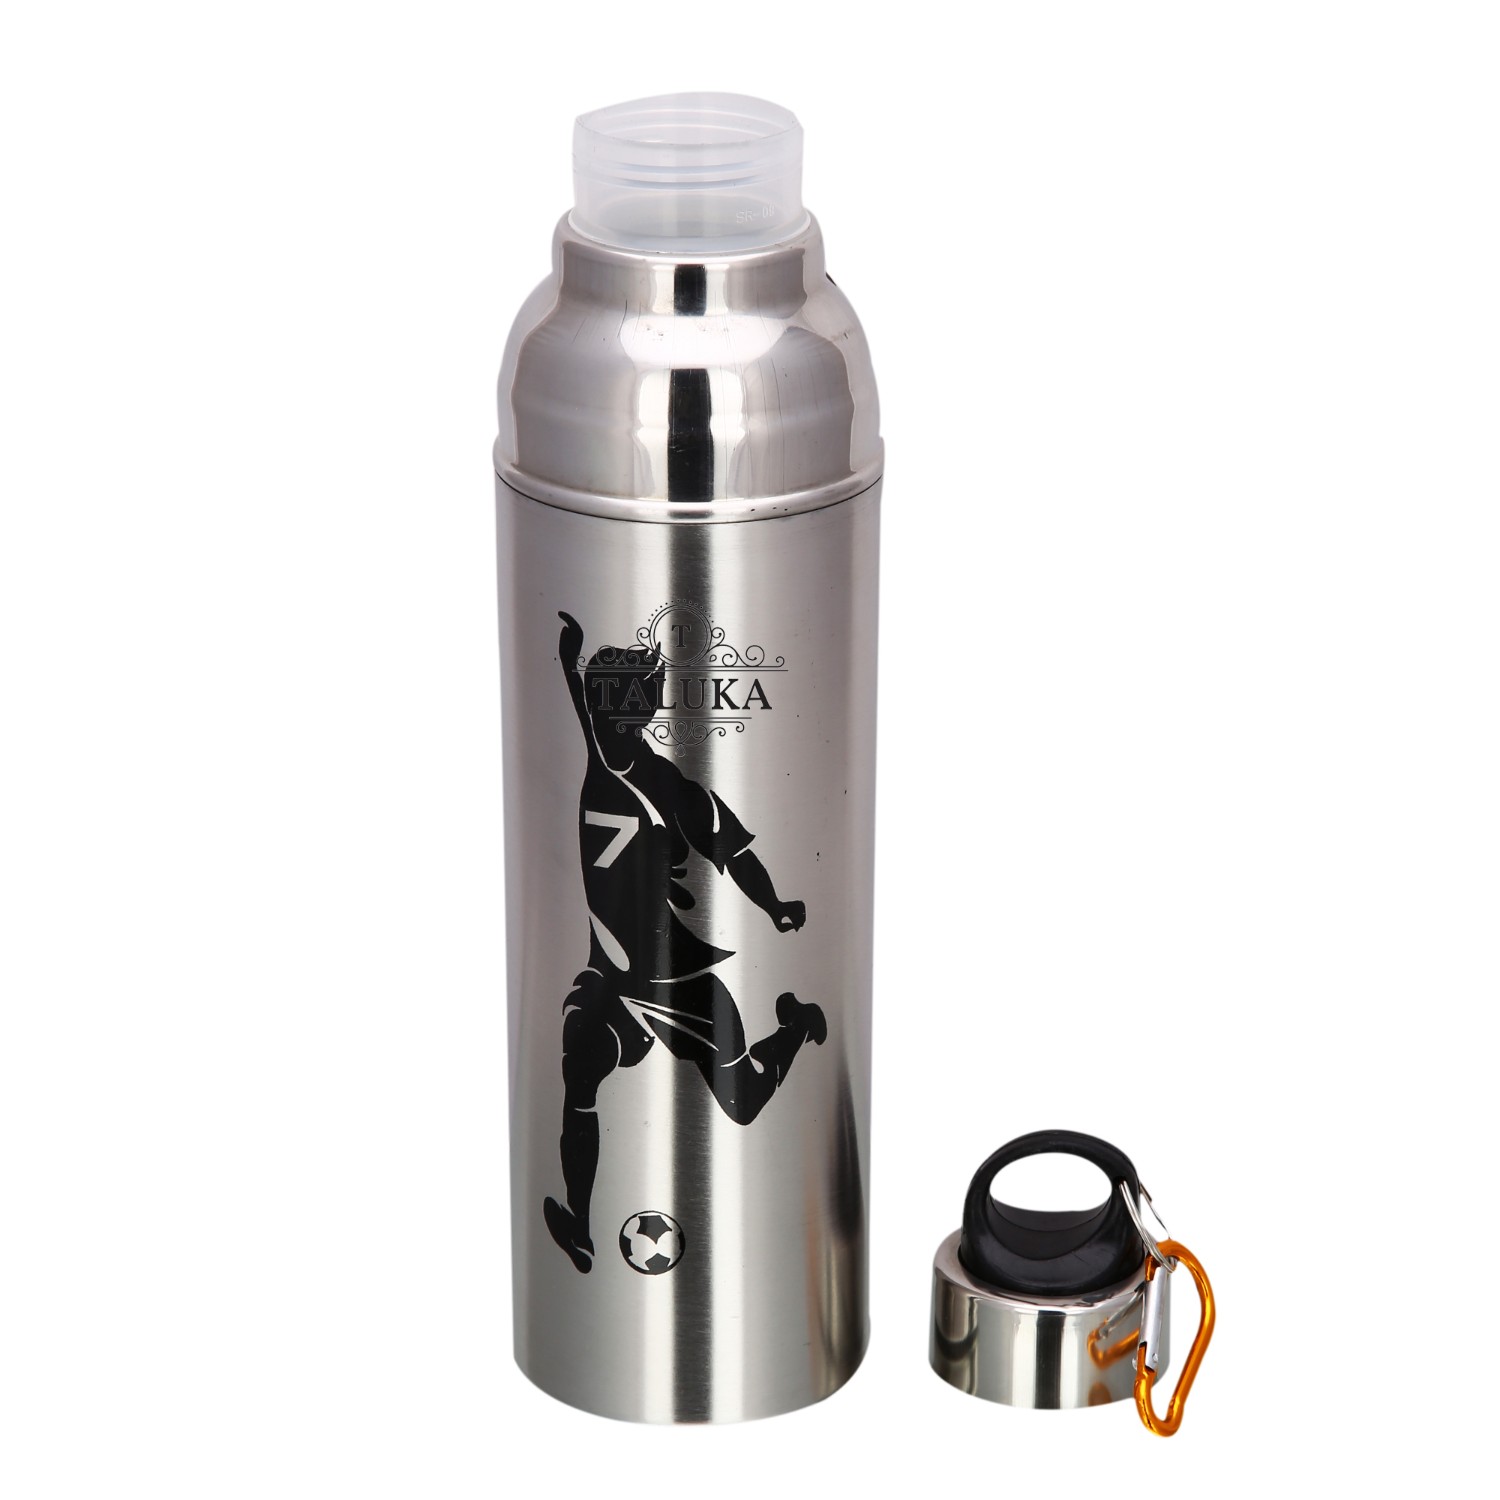 Stainless Steel Insulated Hot & Cold Water Bottles Sports Bottle Sipper